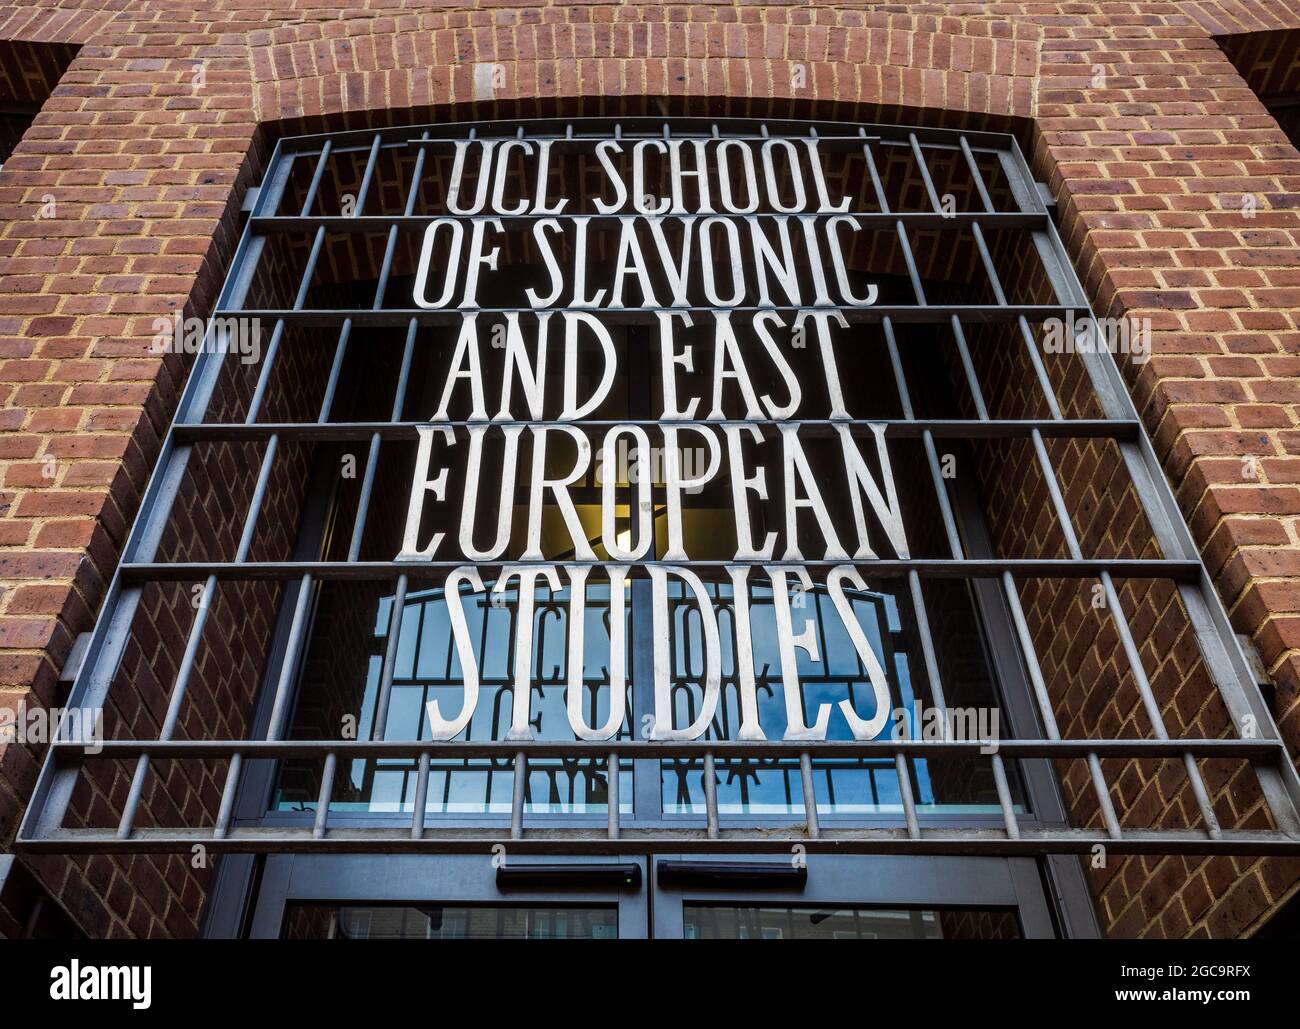 UCL School of Slavonic and East European Studies London. Opened 2005, architects Short and Associates. Stock Photo